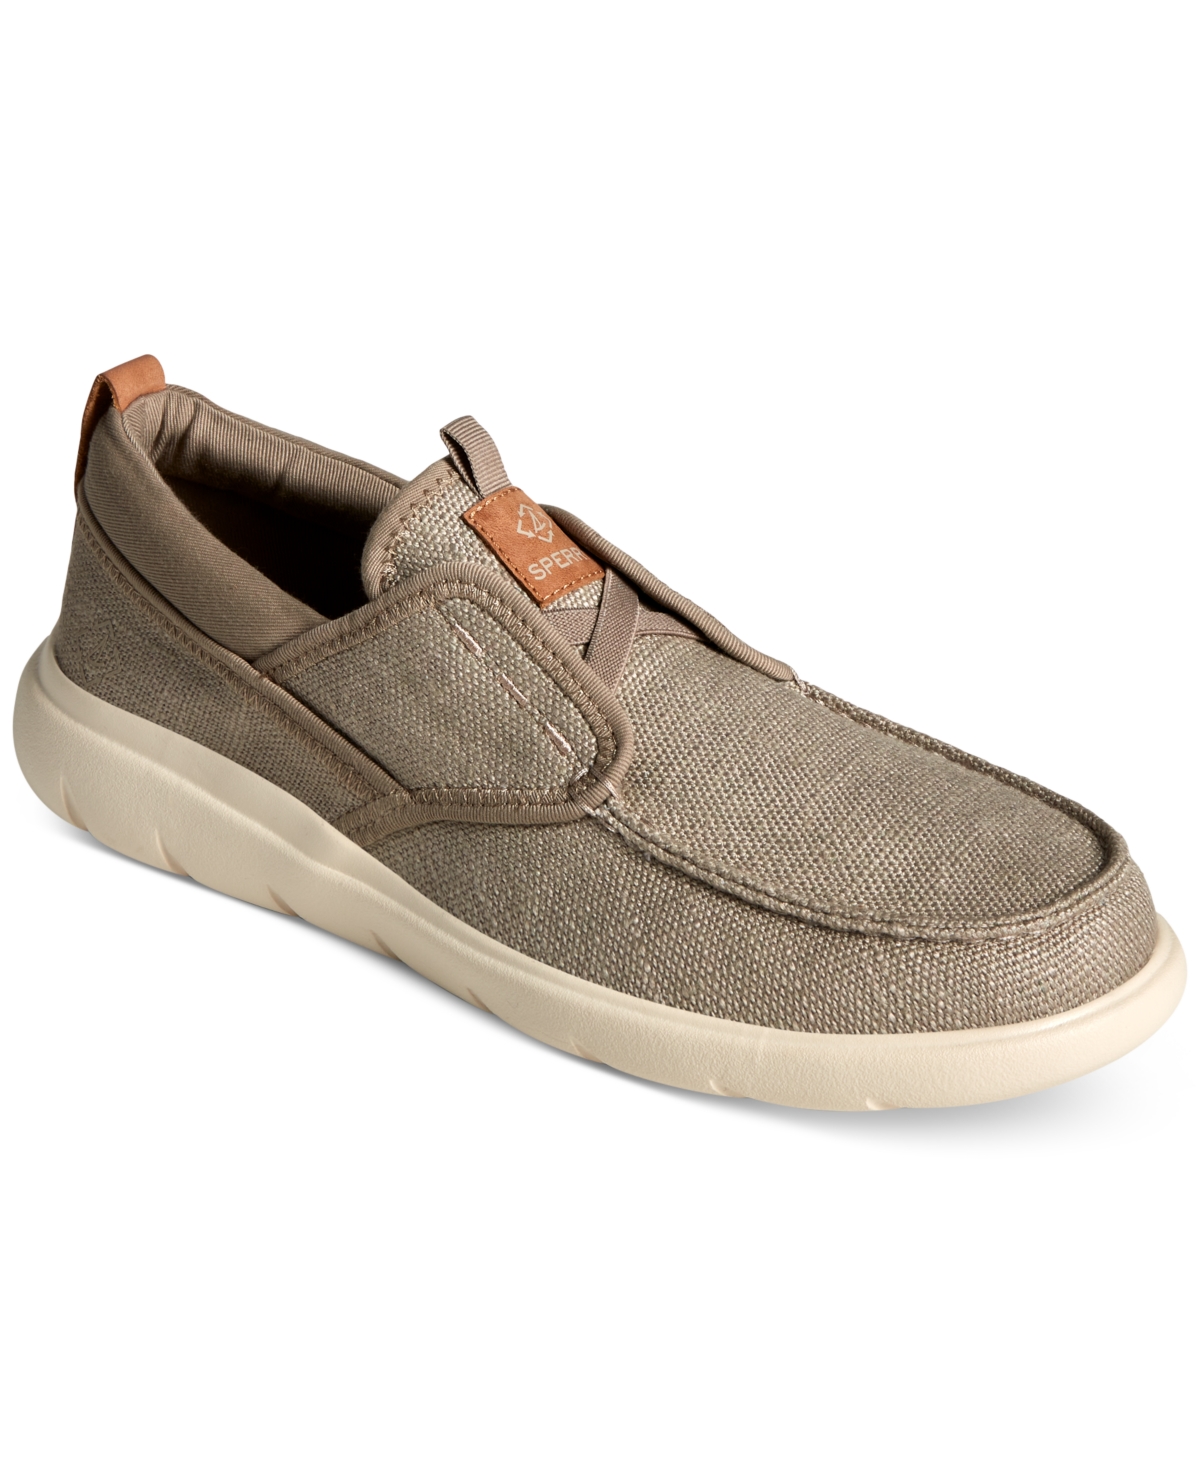 Sperry Men's Seacycled Captain's Moc Baja Boat Shoes In Taupe